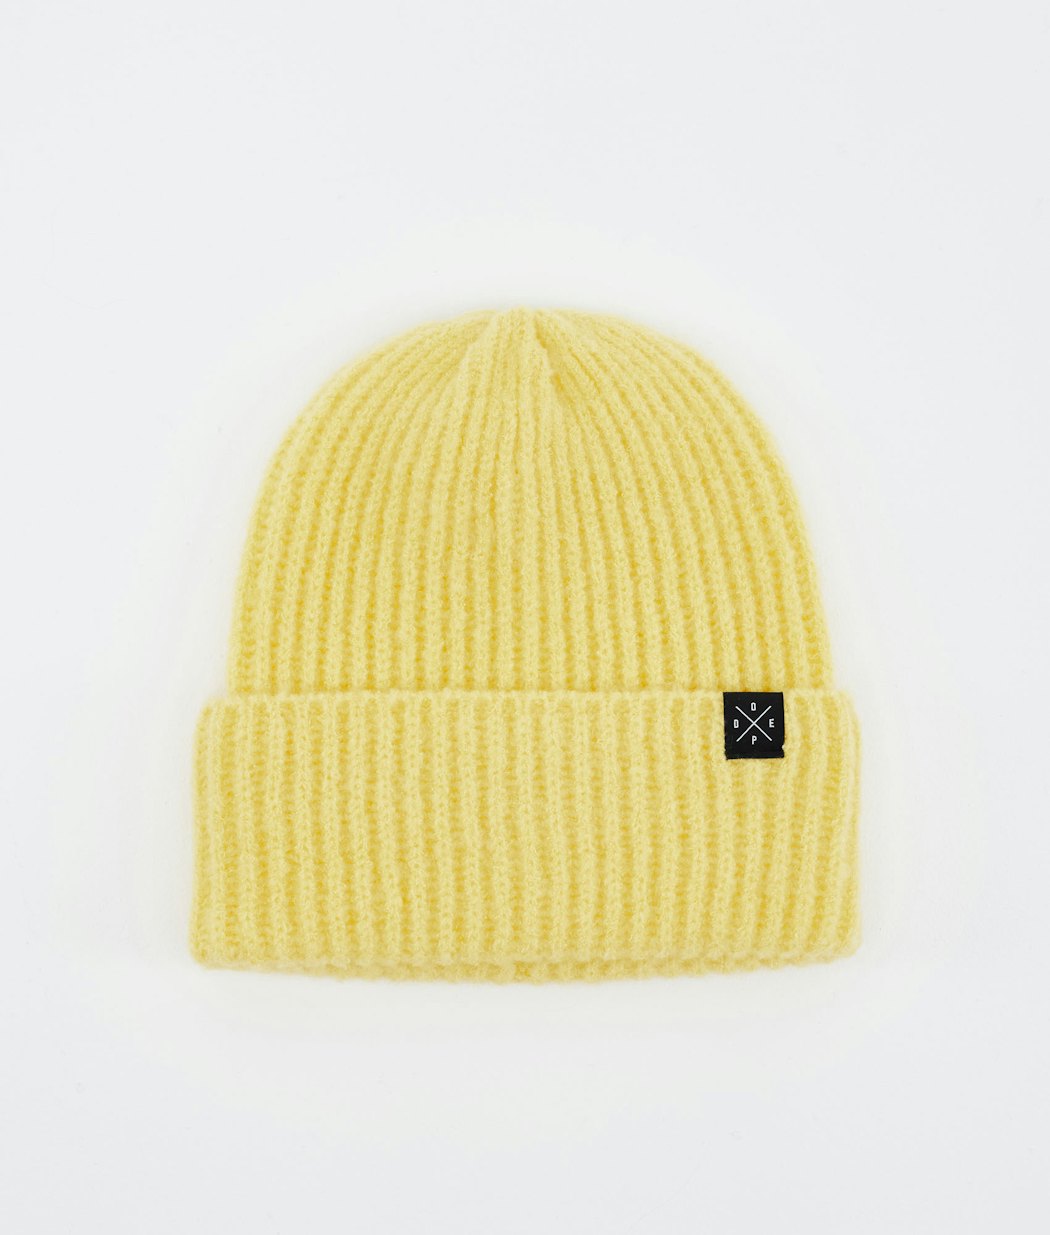 Dope Chunky Men's Beanie Faded Yellow